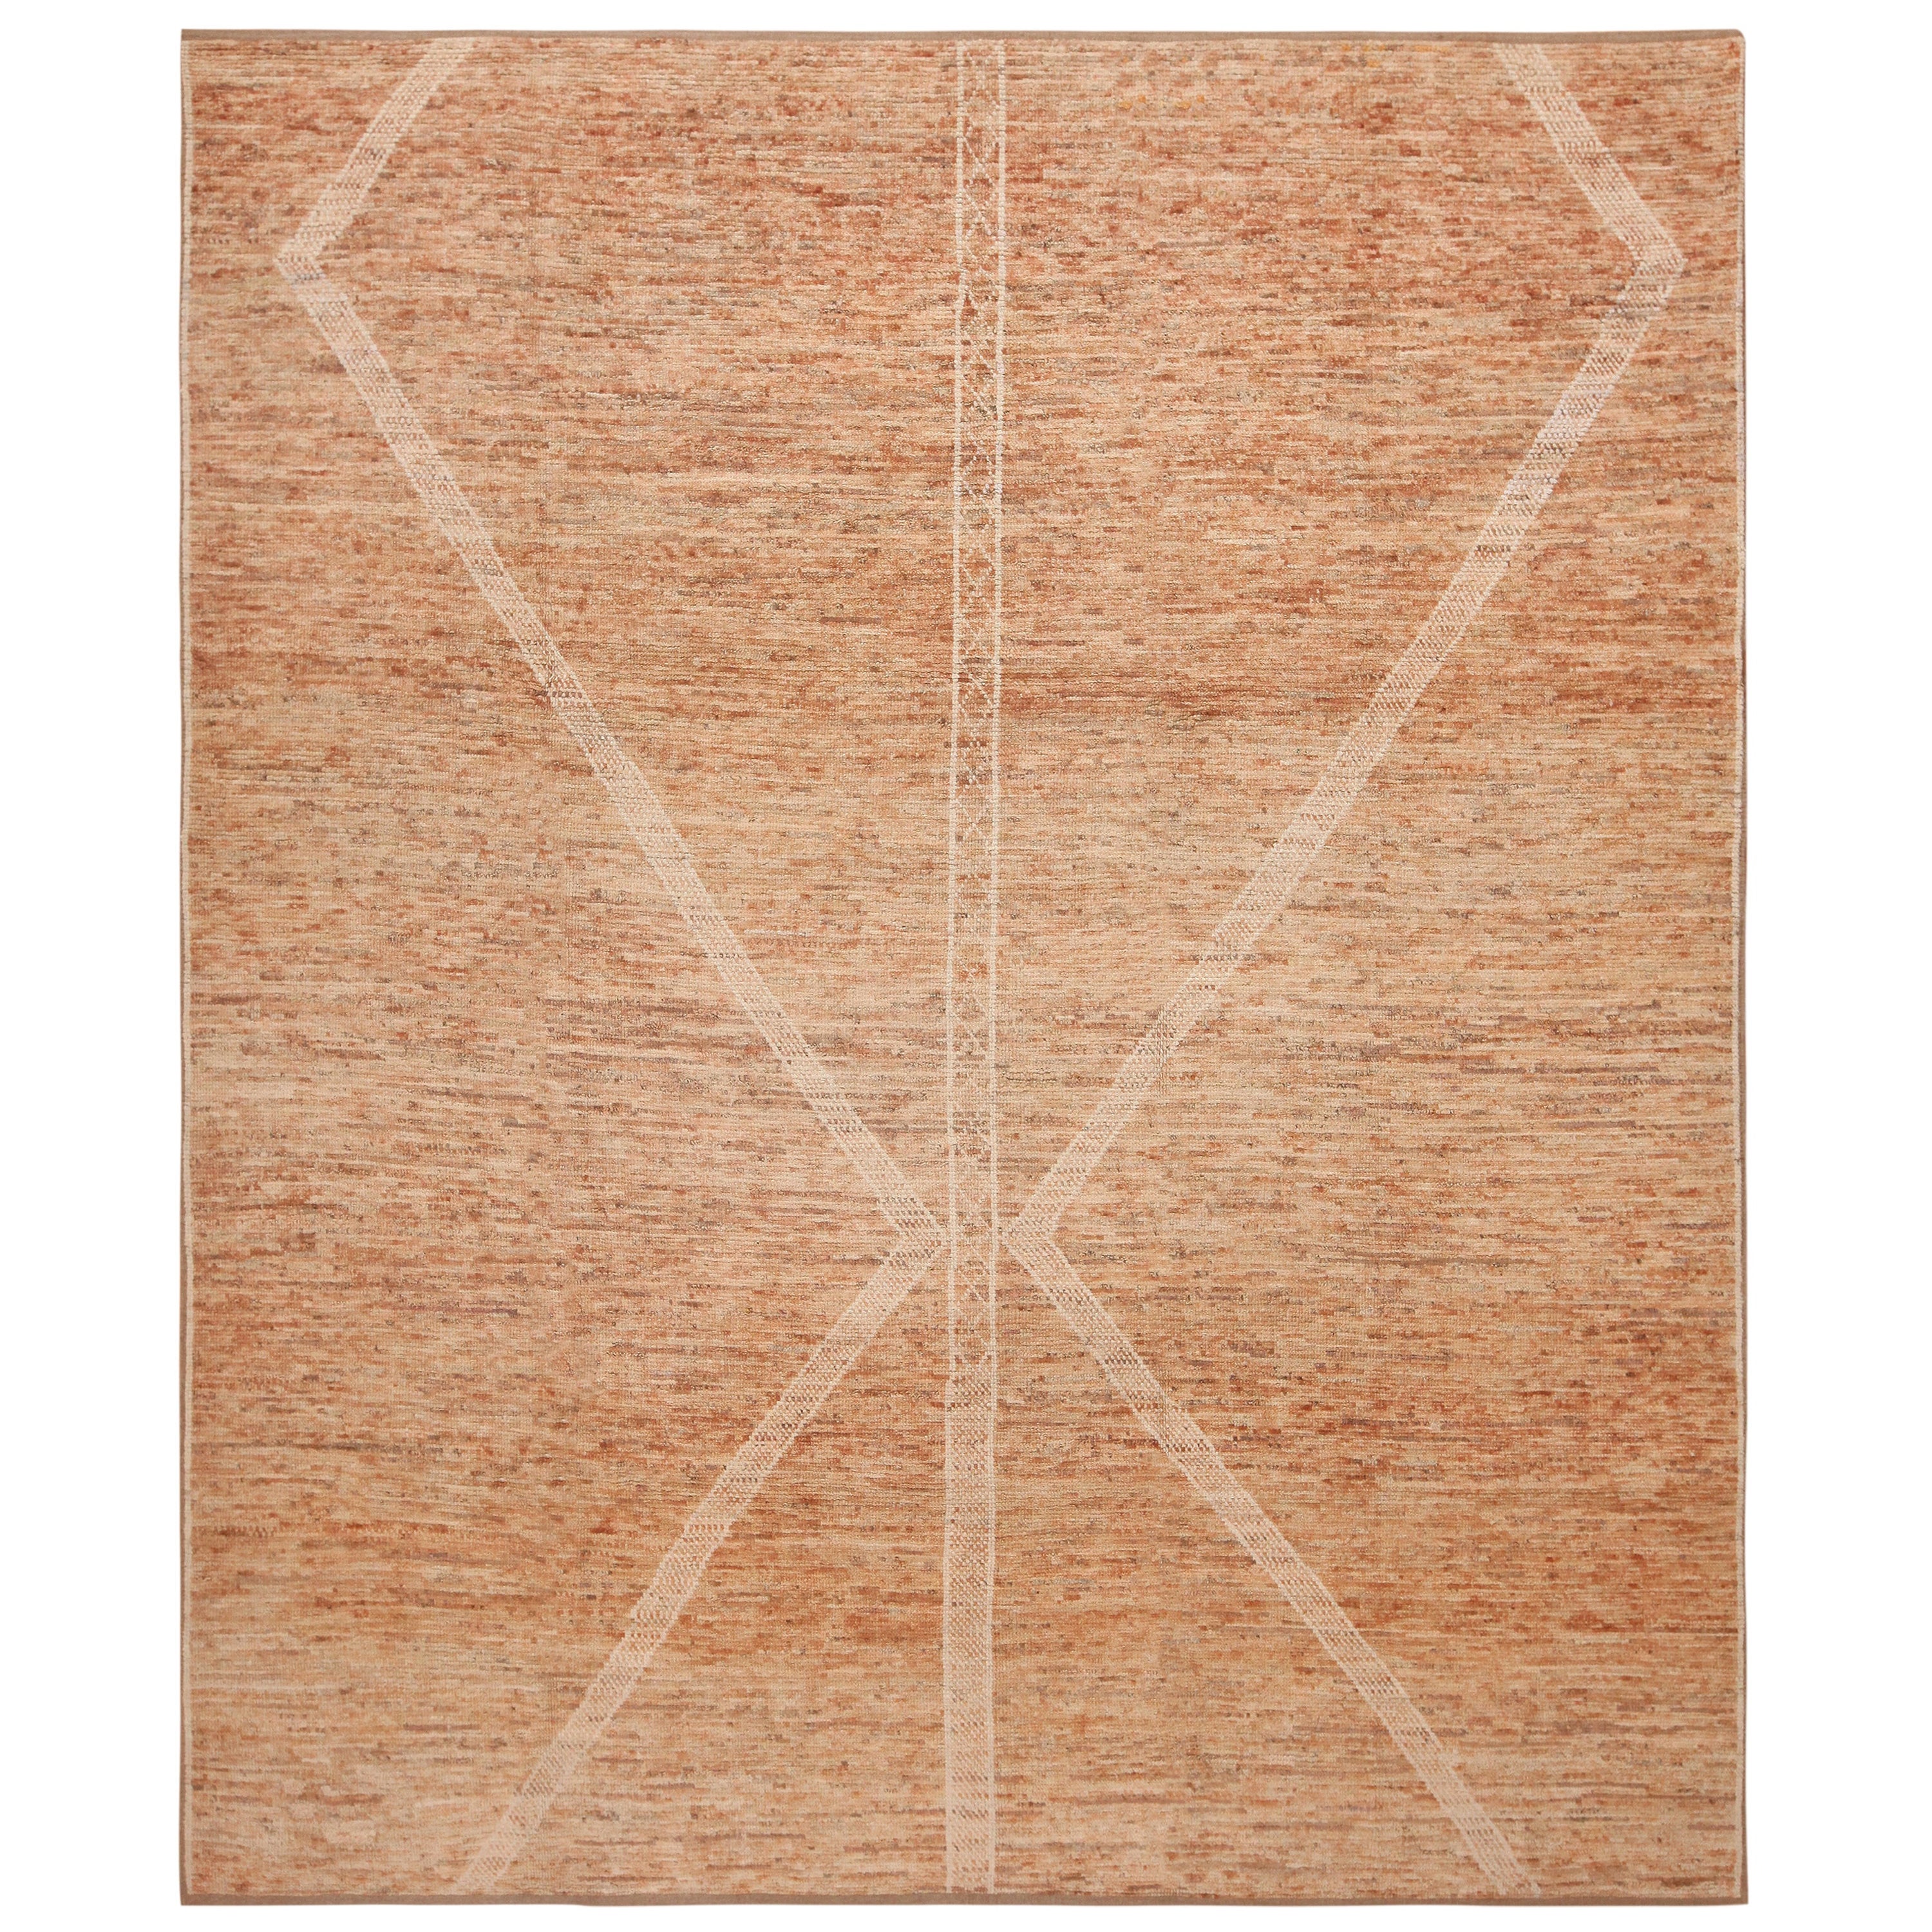 Nazmiyal Collection Minimalist Design odern Area Rug. 8 ft 4 in x 9 ft 7 in For Sale